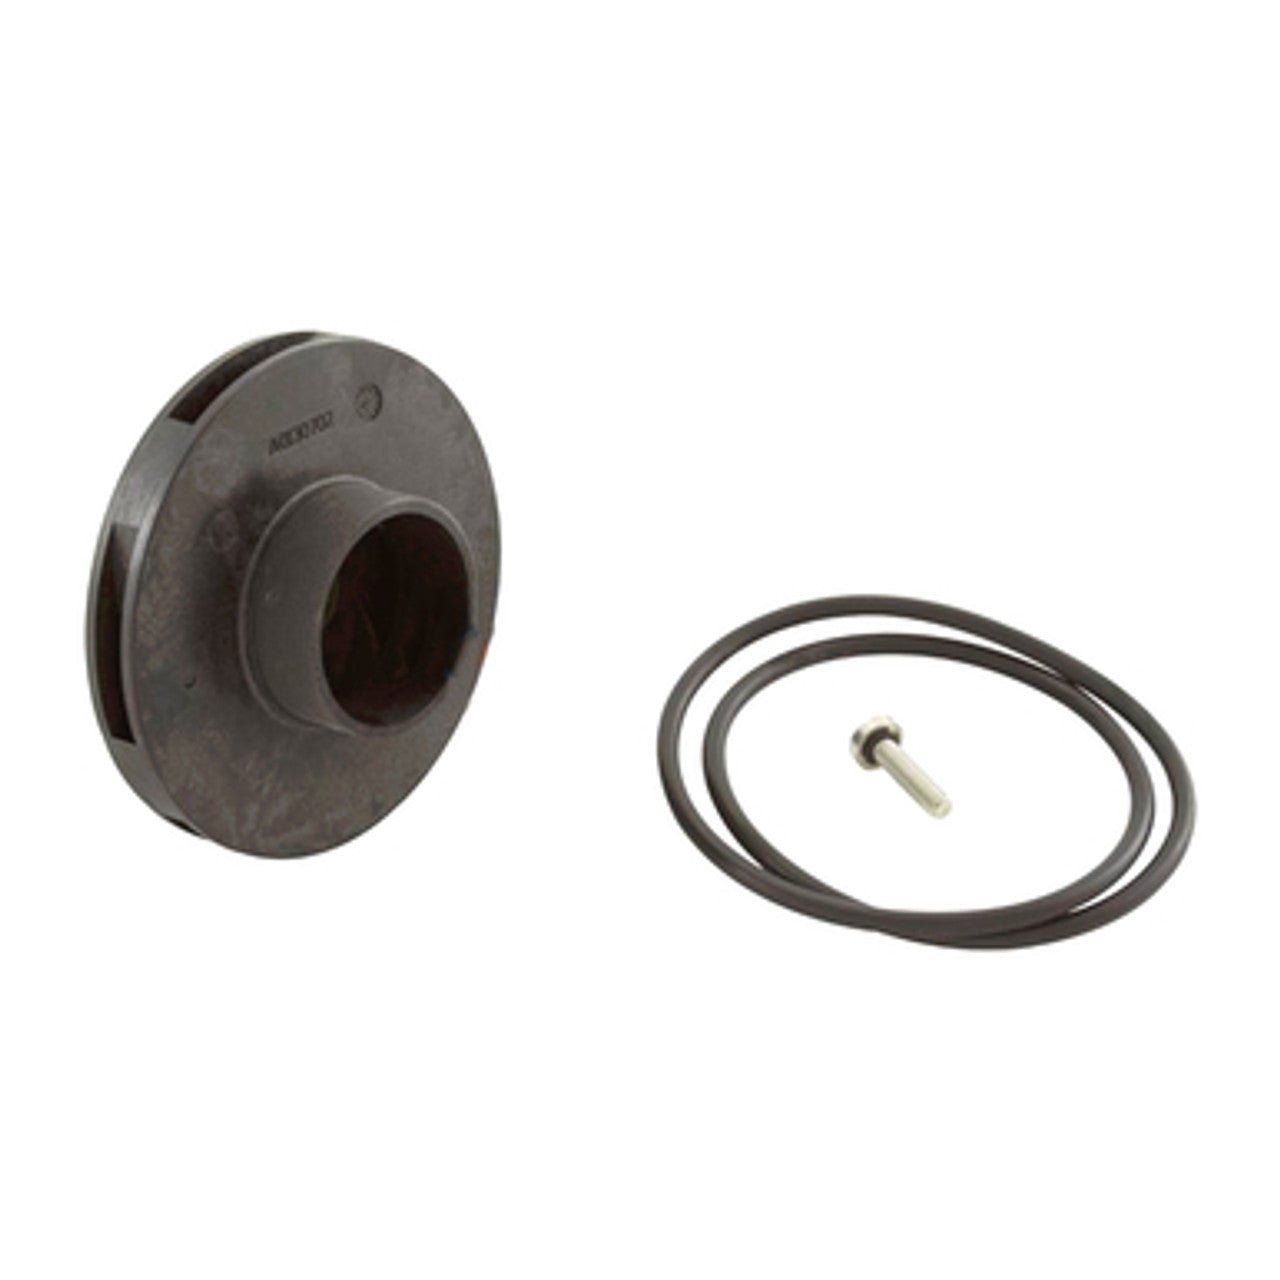 Jandy FloPro 1HP Impeller & Screw w/ O-Ring R0479602 - Pool Pump Parts - img-1